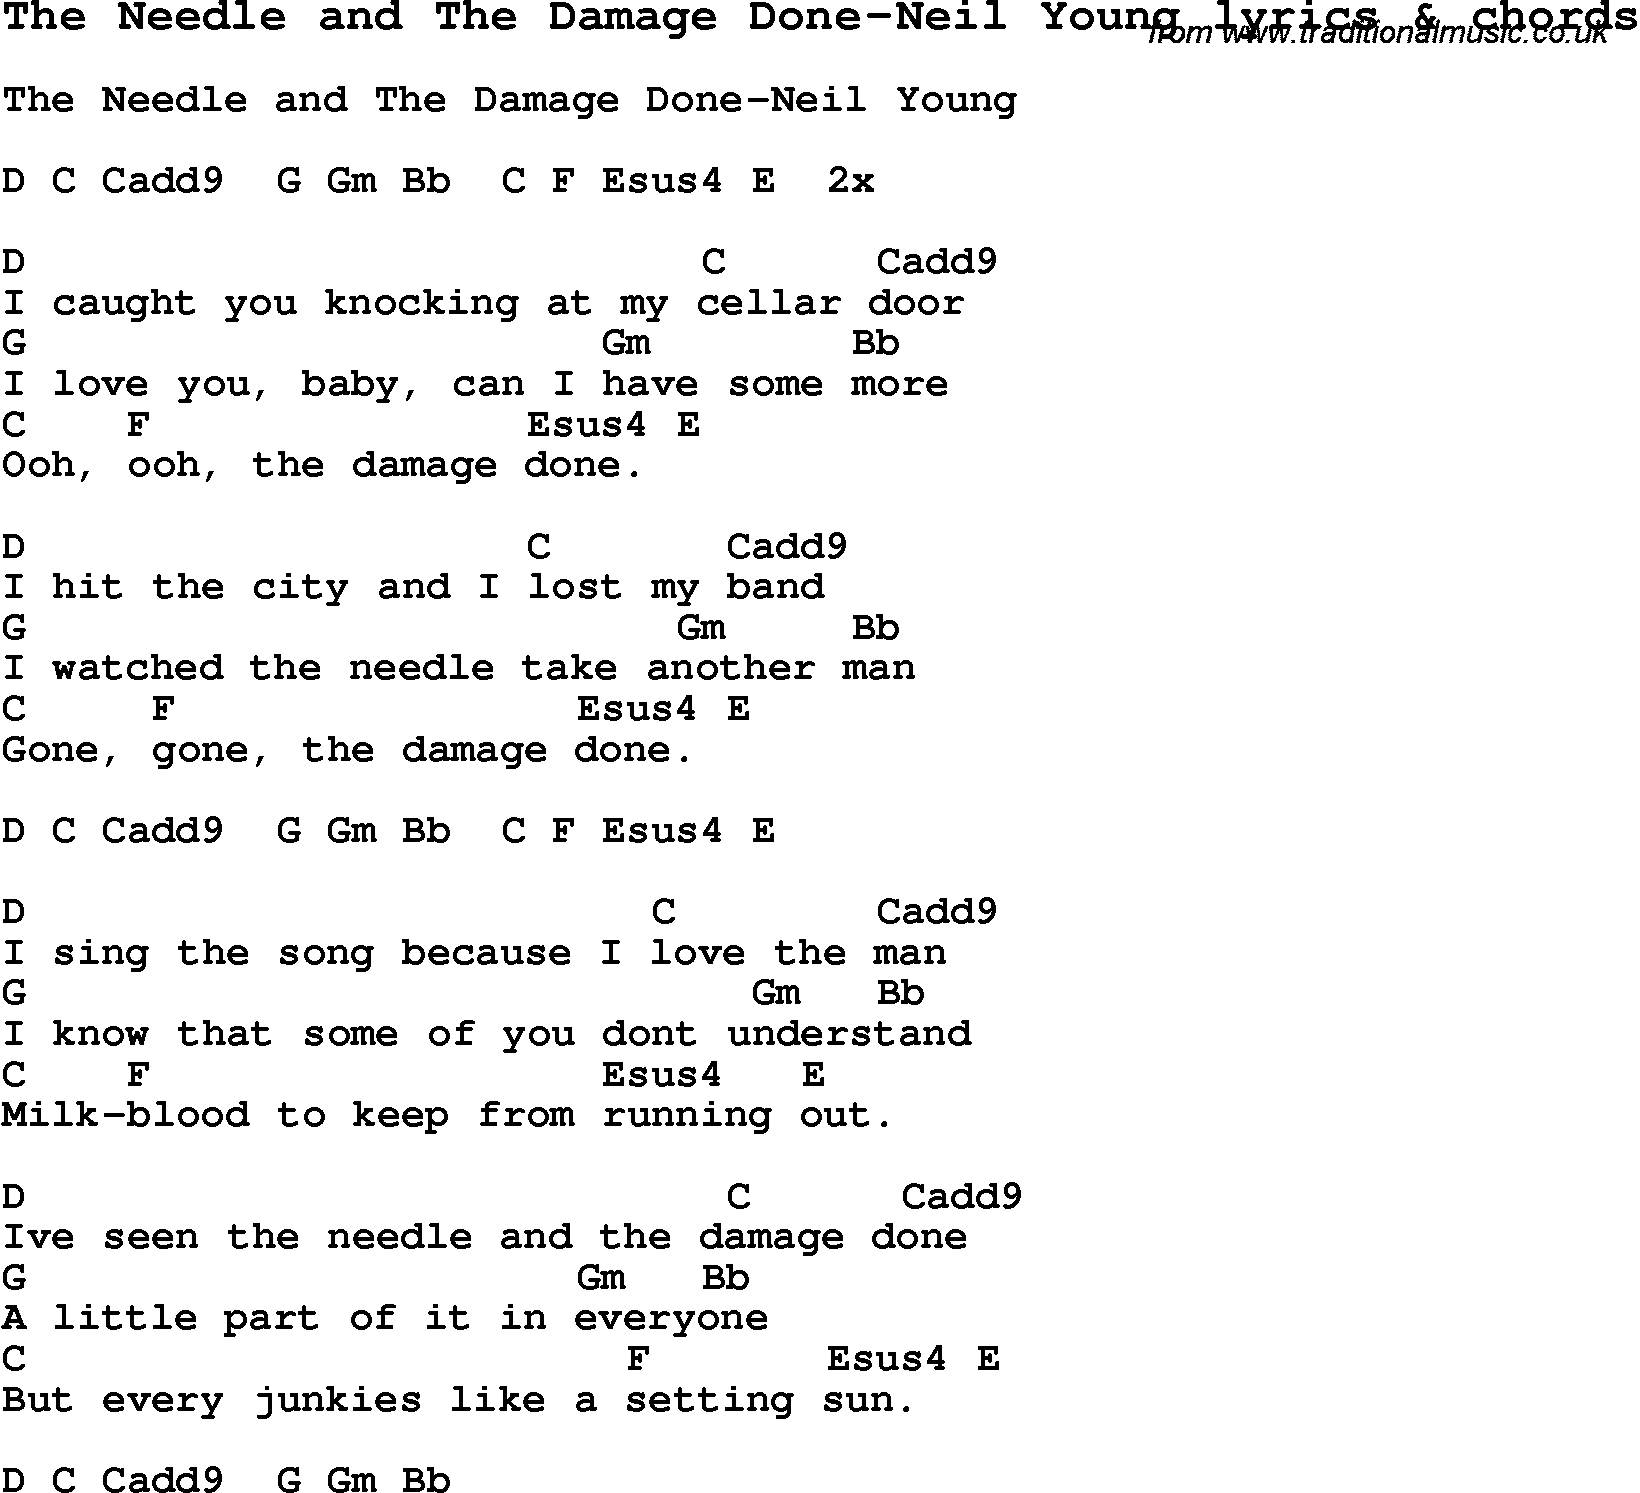 Love Song Lyrics for: The Needle and The Damage Done-Neil Young with chords for Ukulele, Guitar Banjo etc.